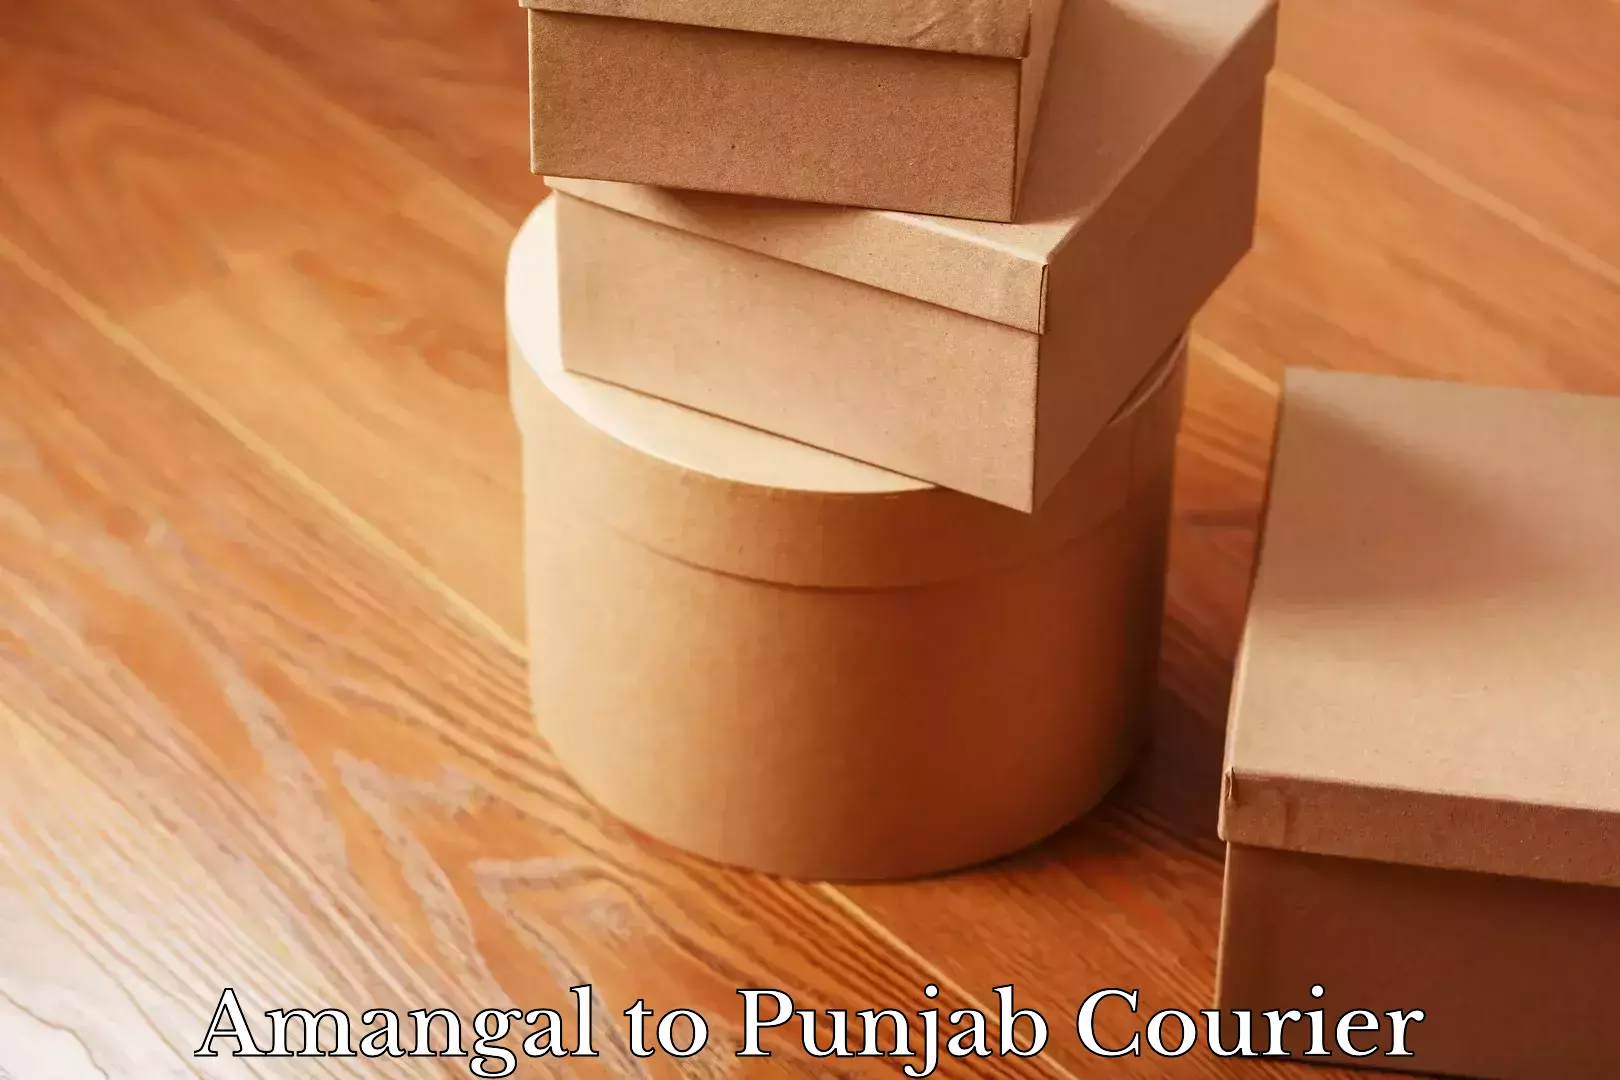 Multi-national courier services Amangal to Punjab